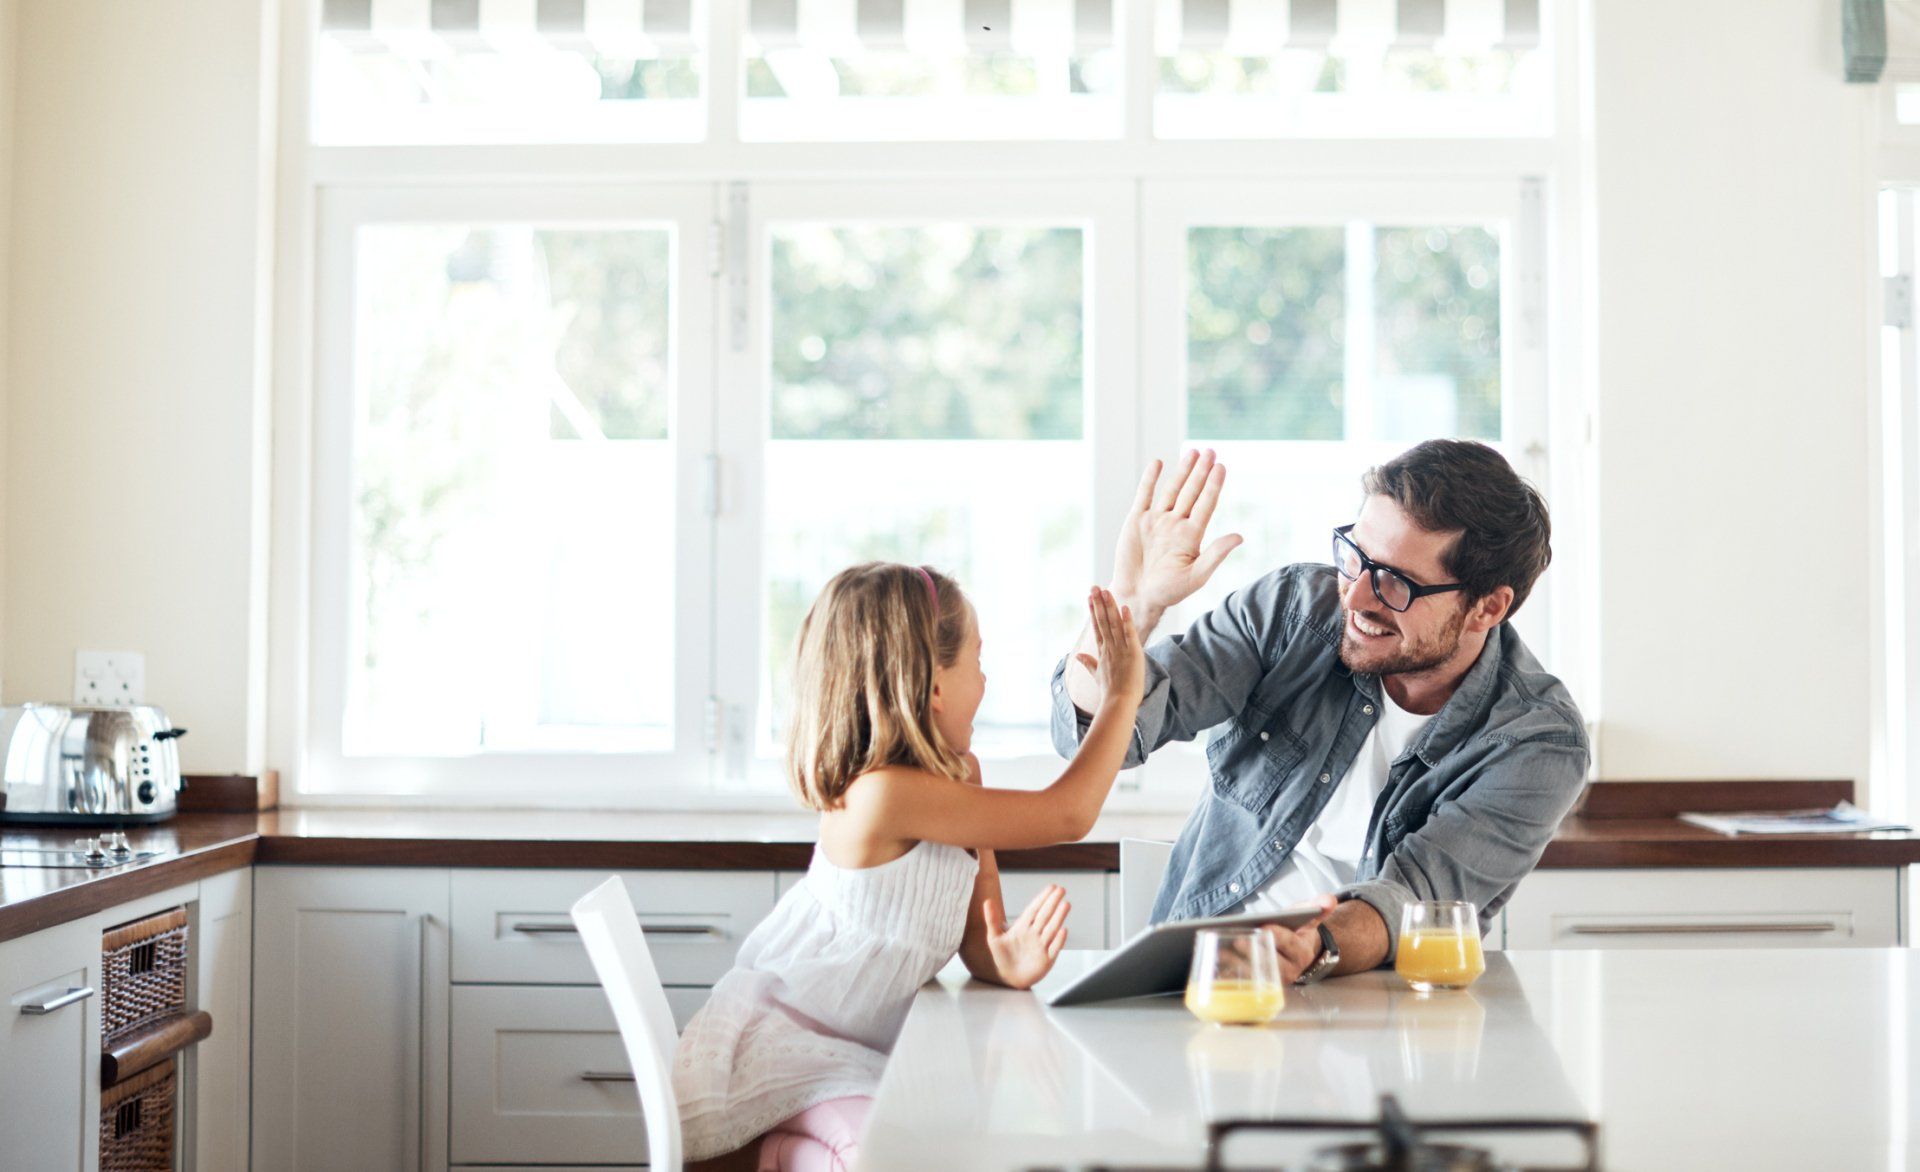 dad and daughter high five in kitchen